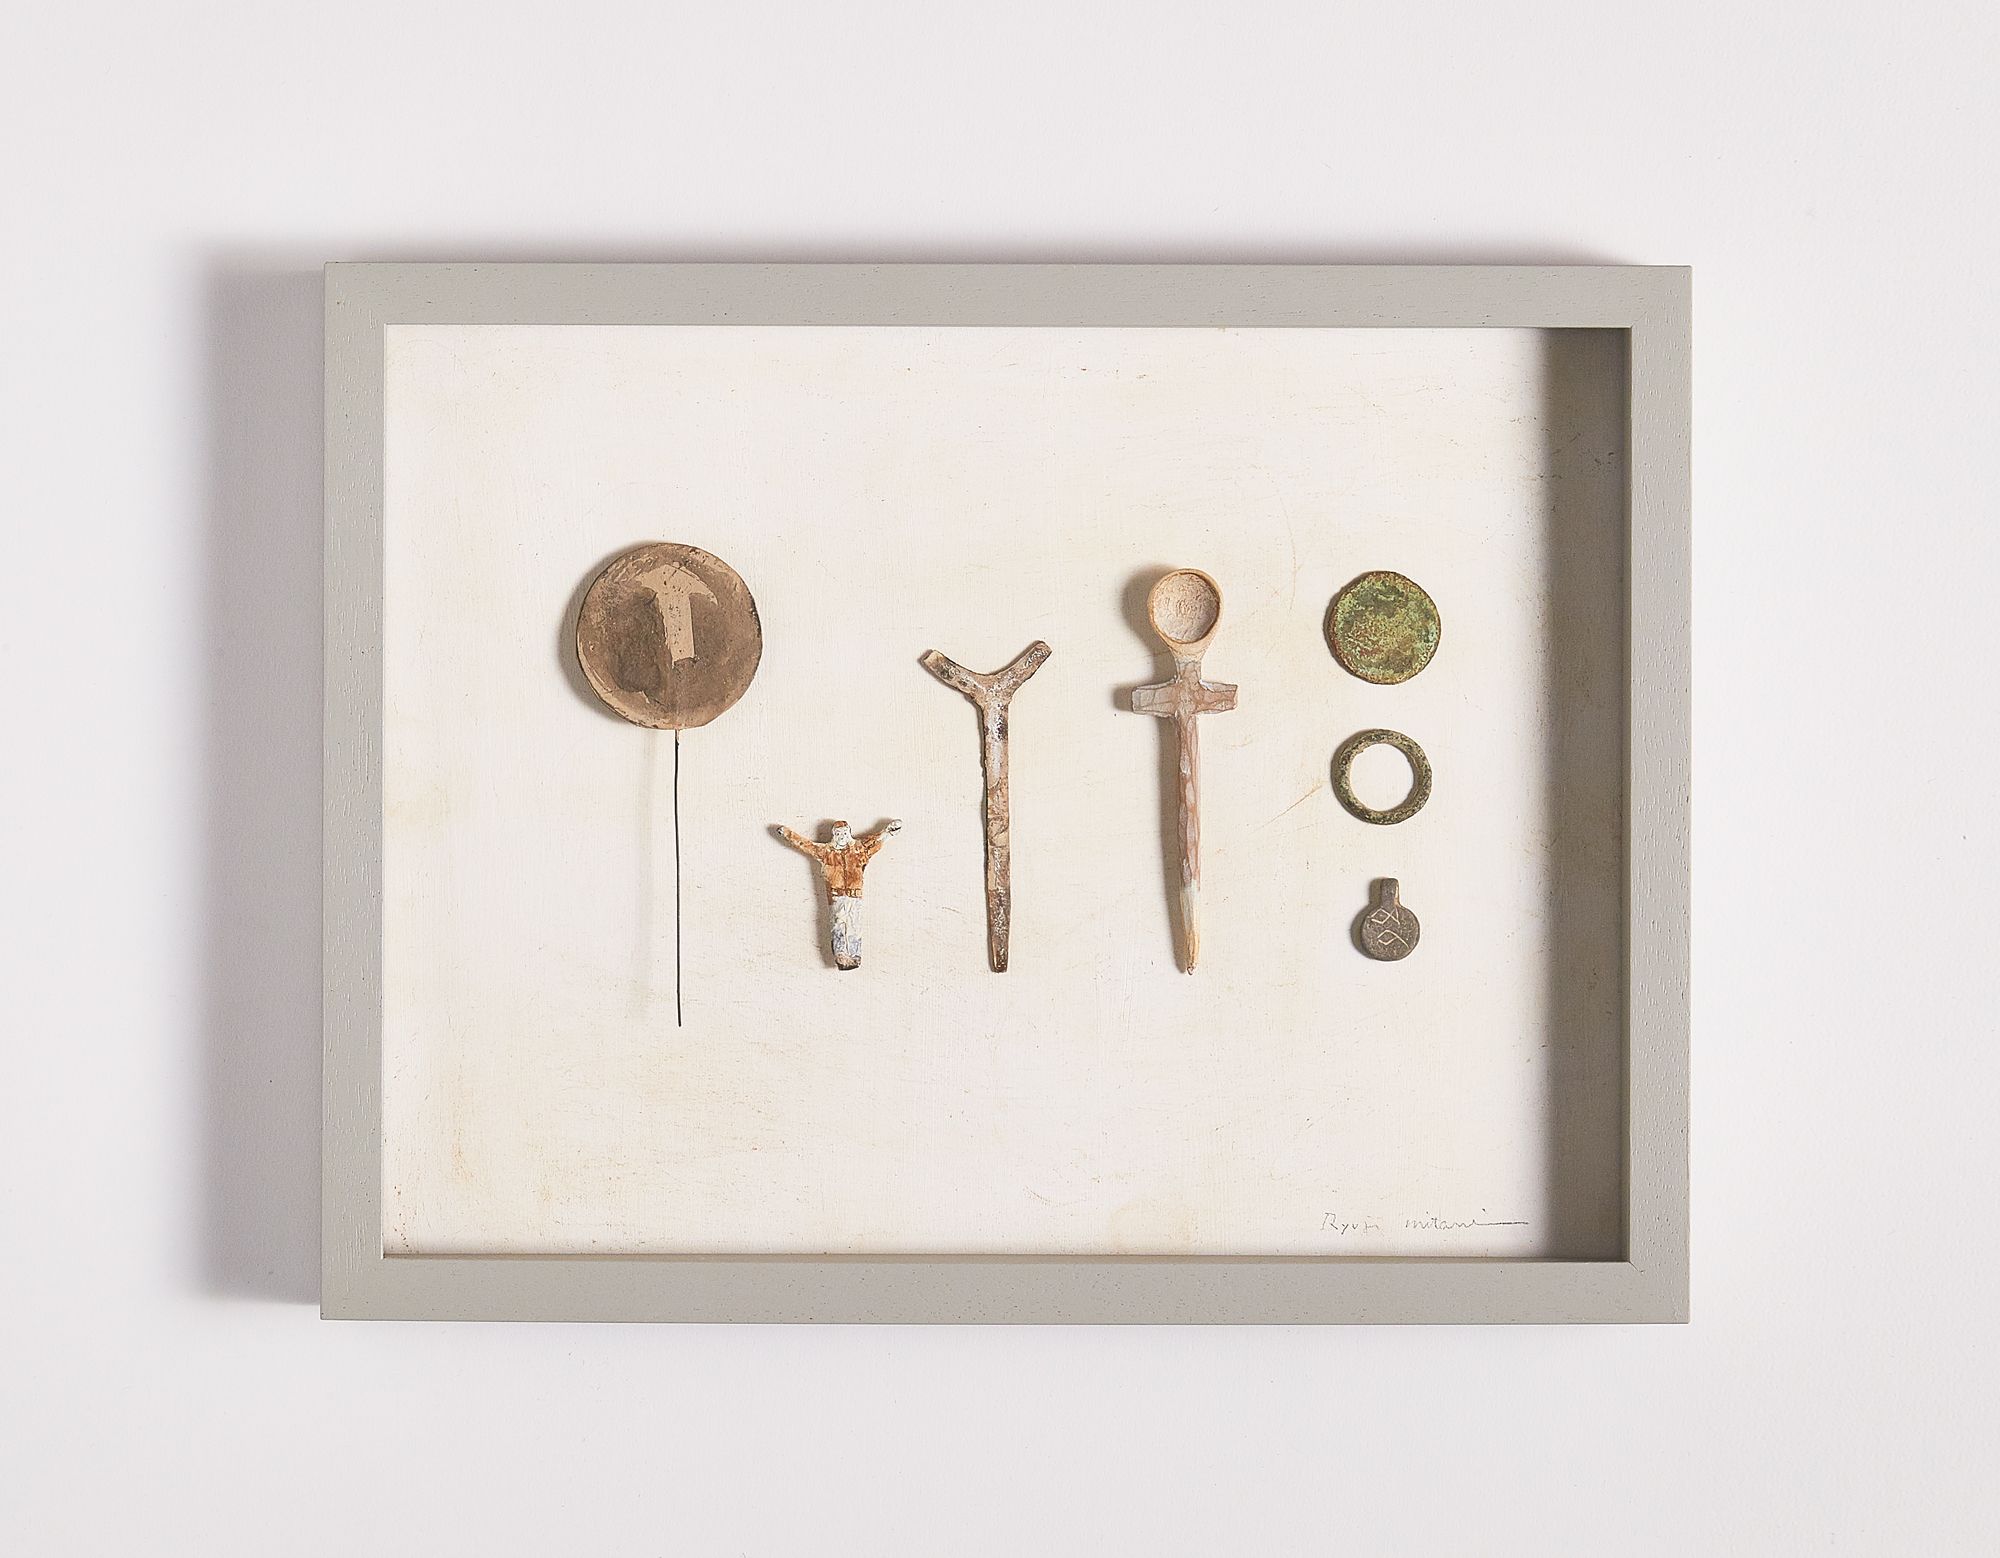 Framed composition of found objects and made objects by Ryuji Mitani